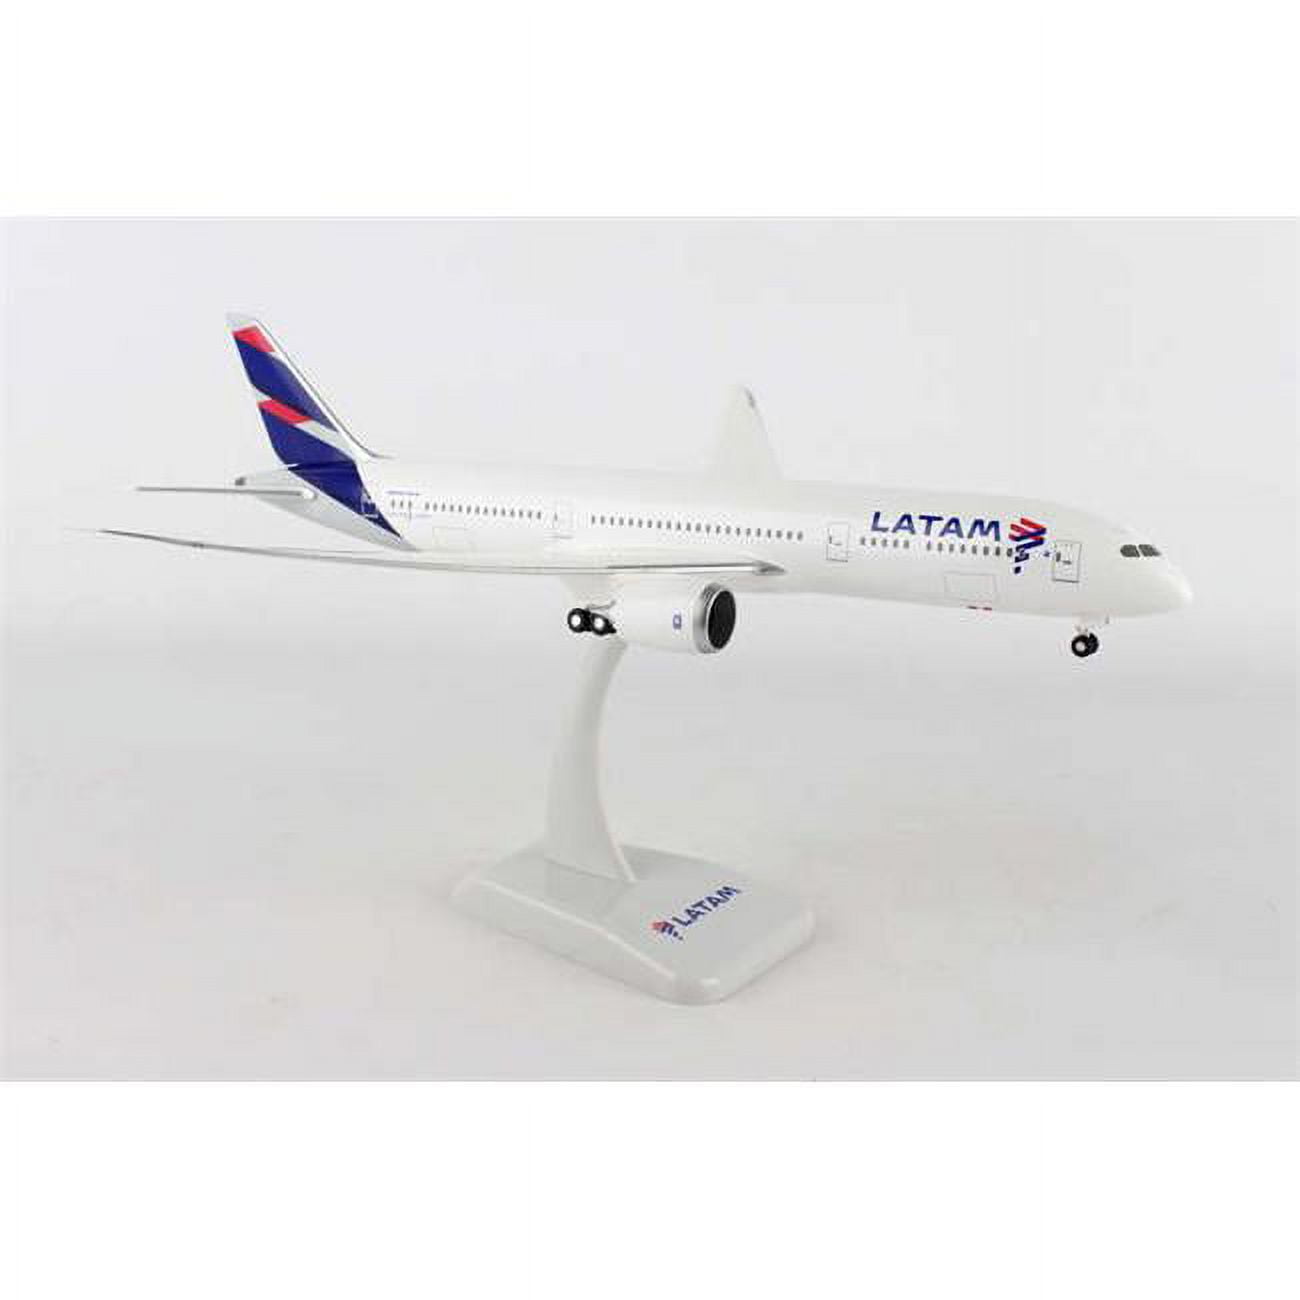 Hogan Wings Hg10734g 1 Isto 200 Latam 787-9 With Gear Model Airplane